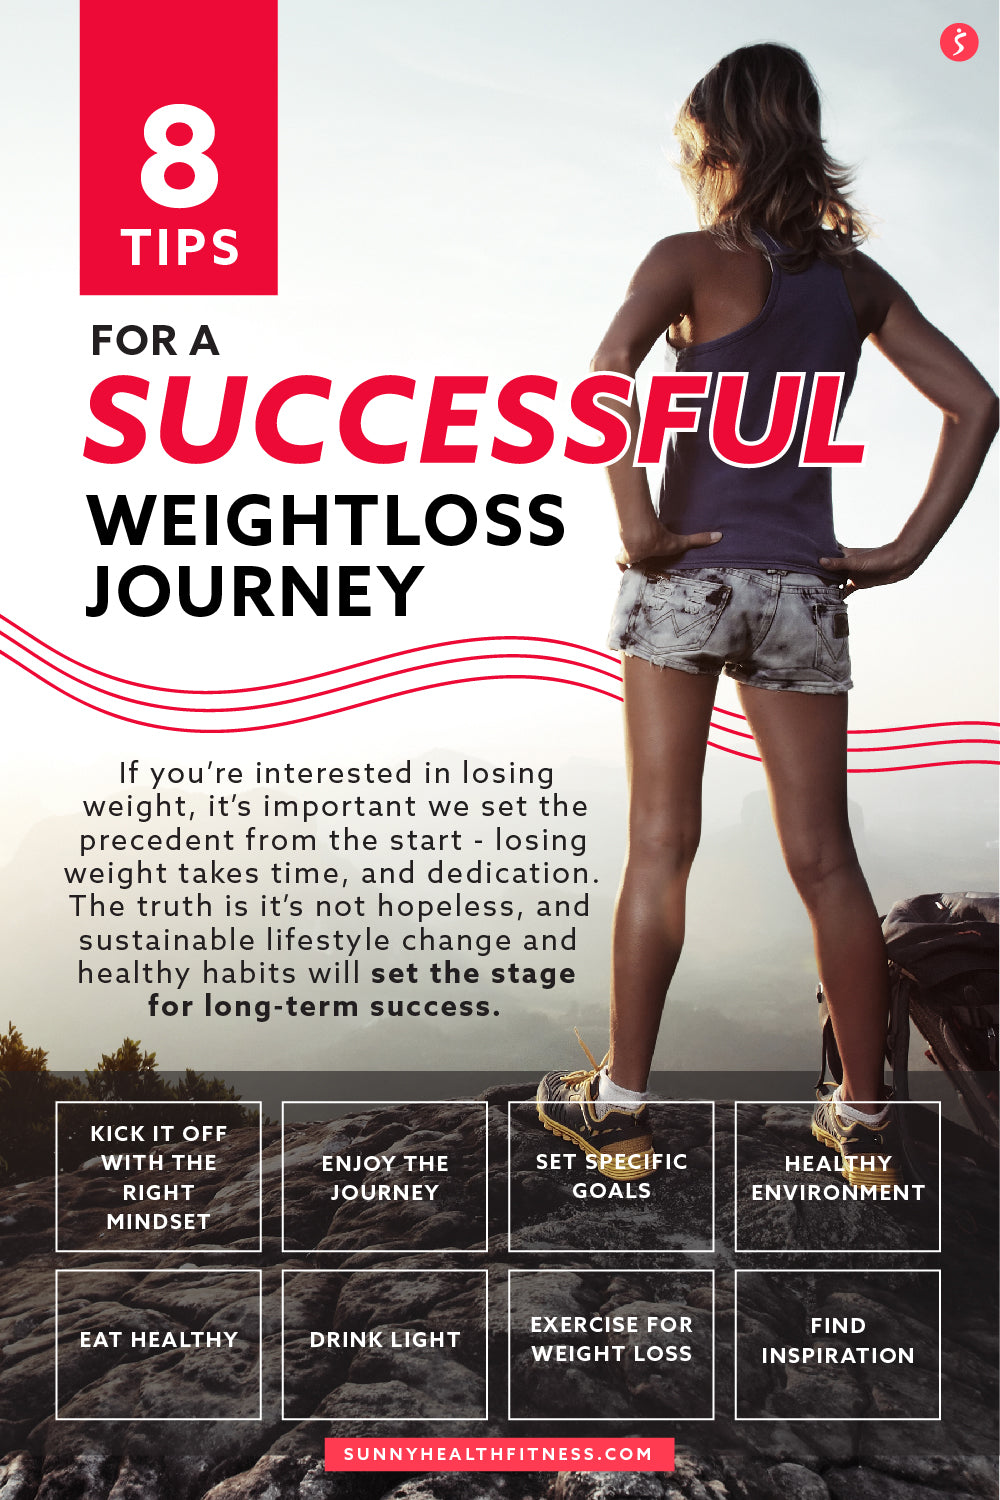 8 Tips for a Successful Weightloss Journey Infographic